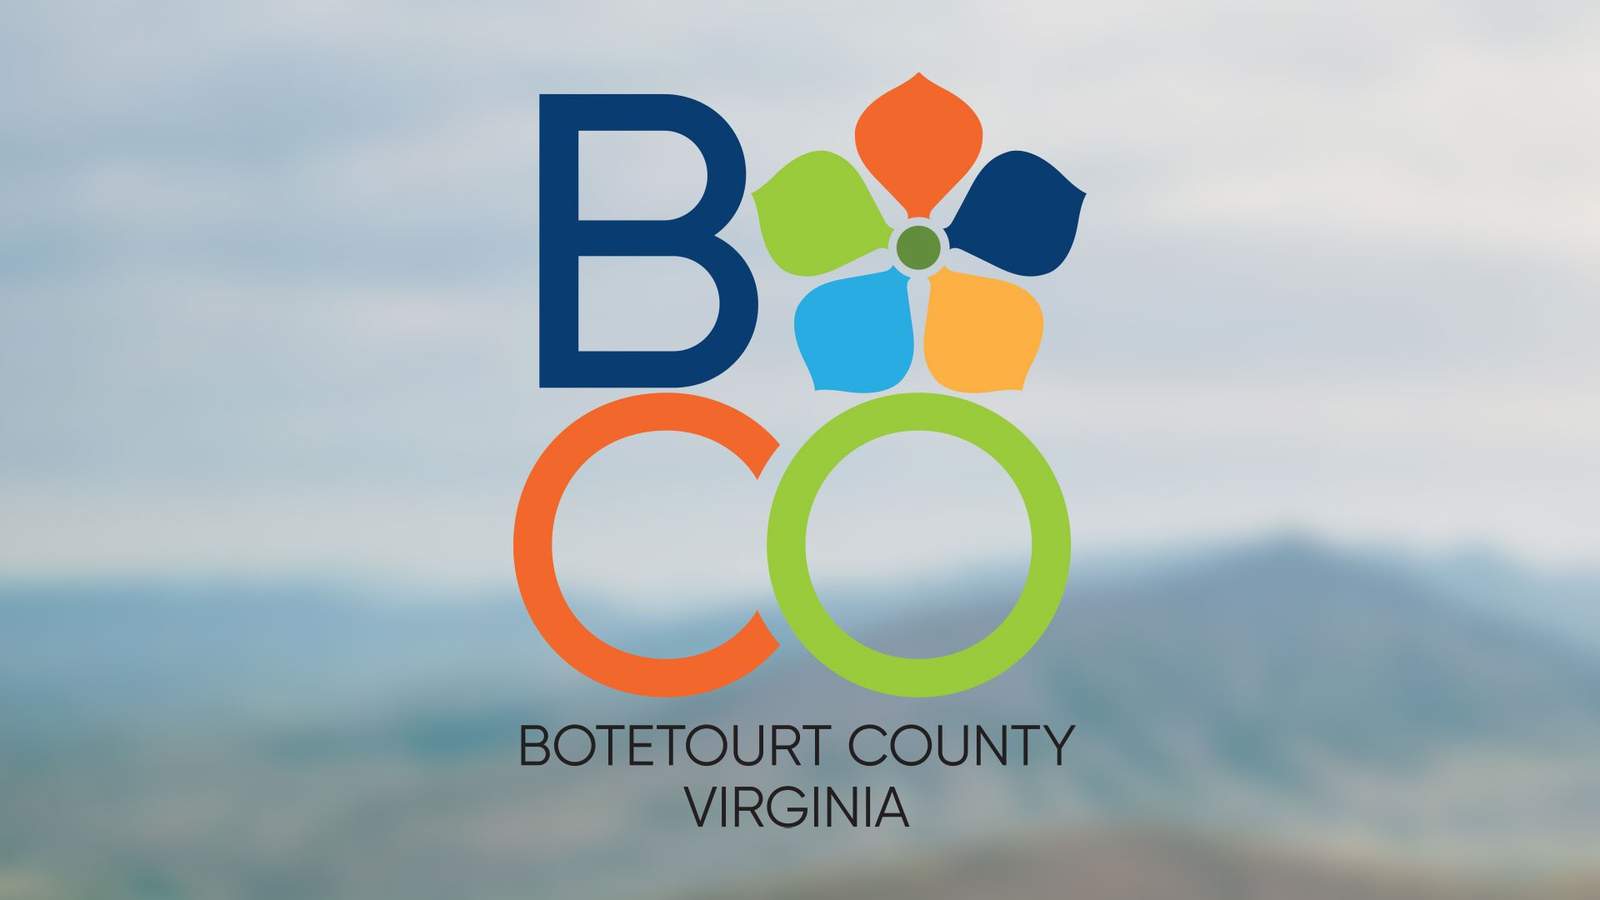 Botetourt County to celebrate 250th anniversary with big event this weekend